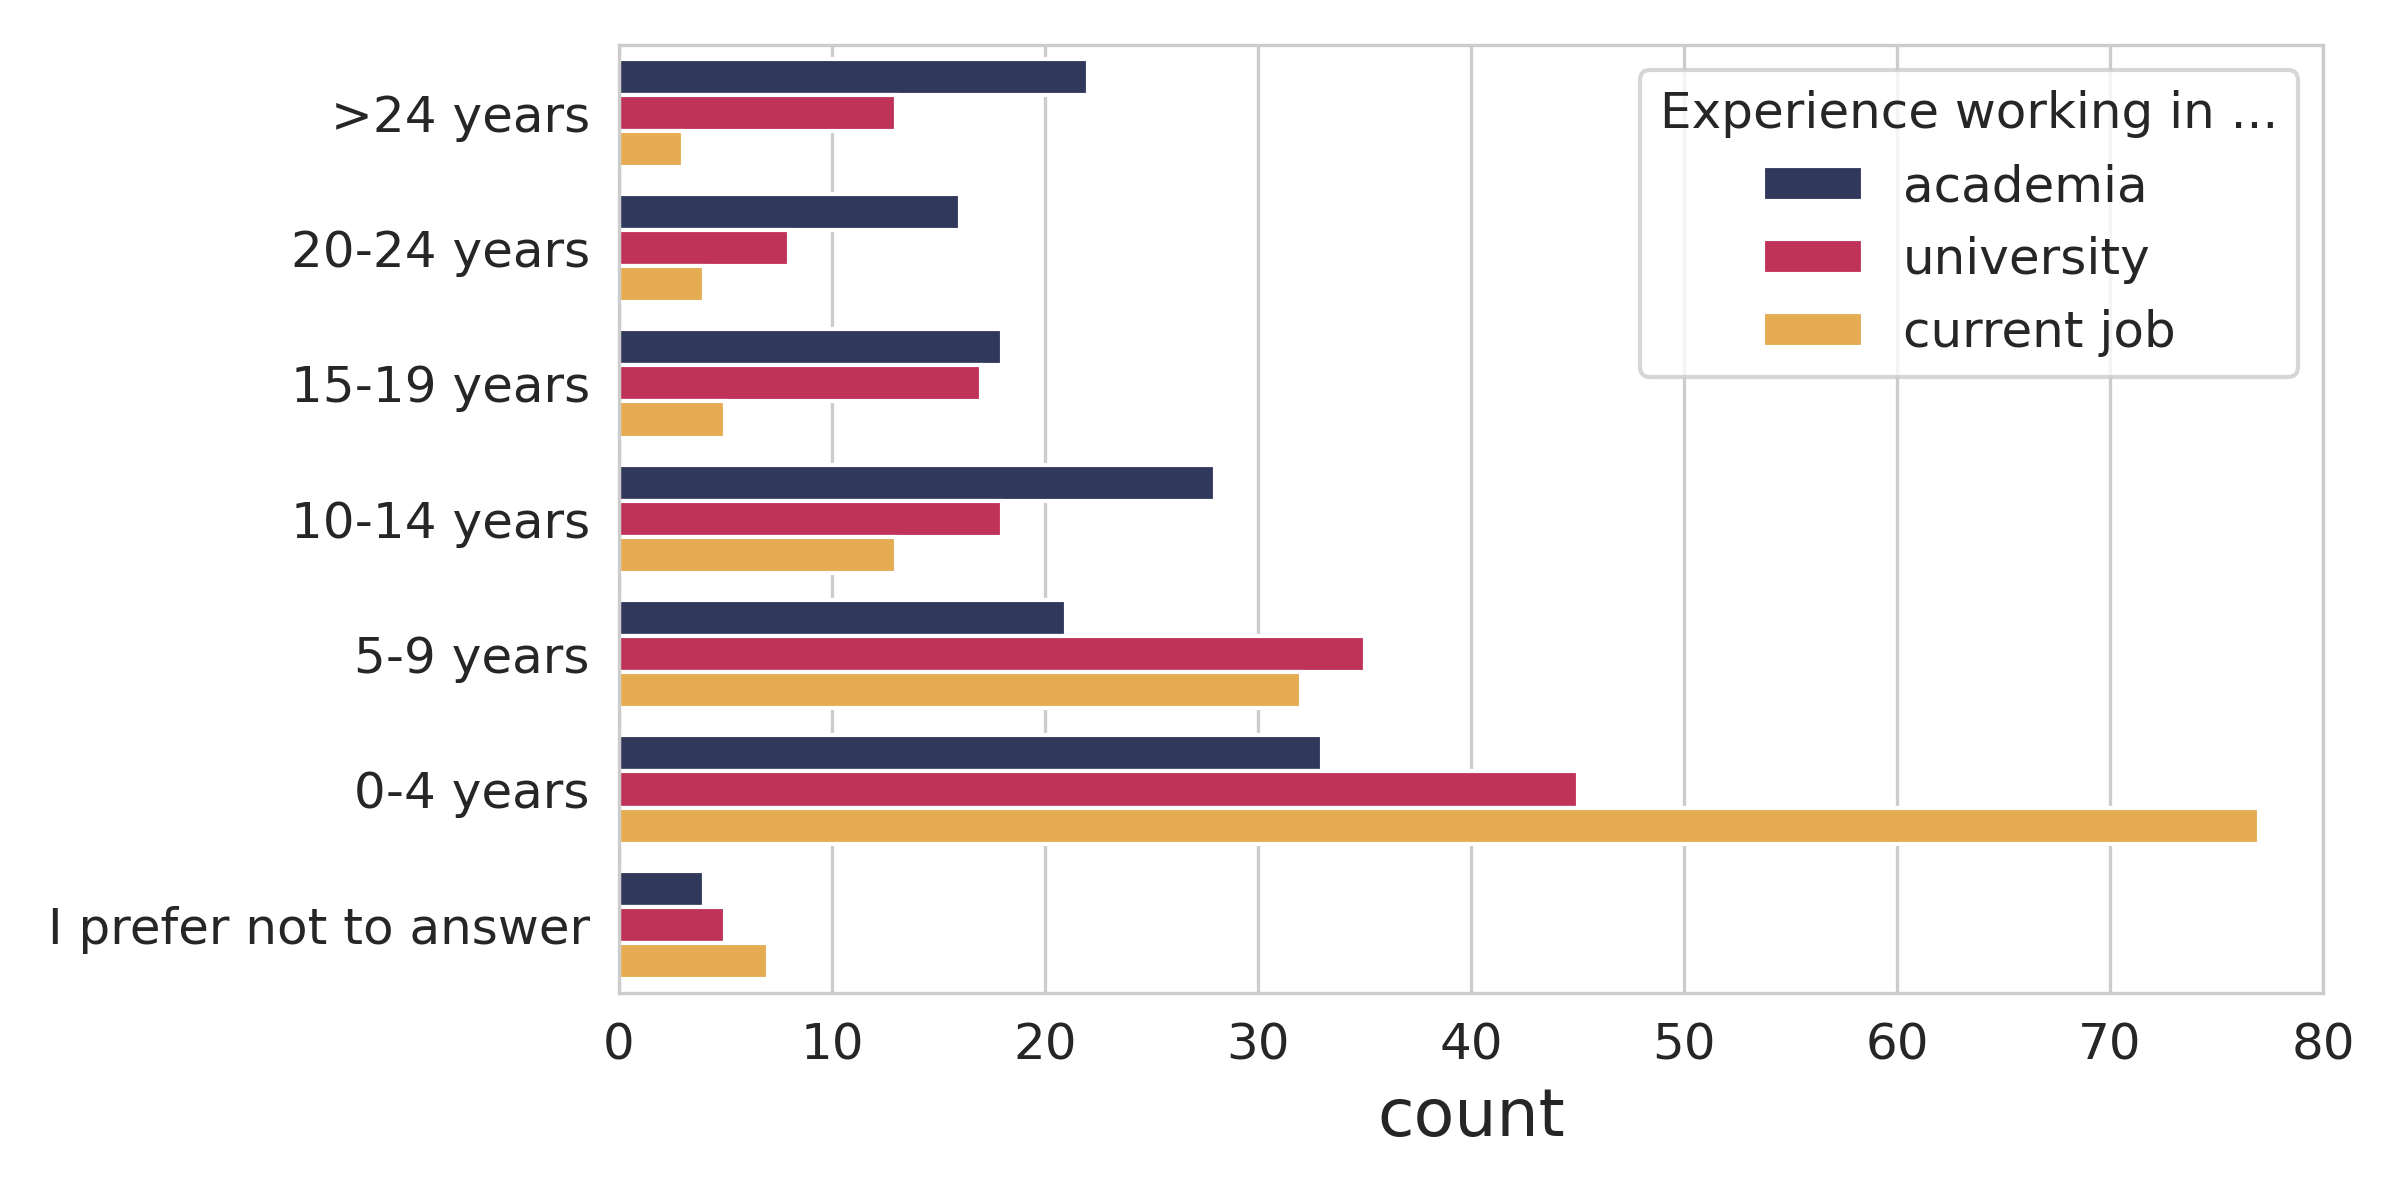 Image showing the years of experience working in academia, the current university and the current job for our pilot study population in Montenegro